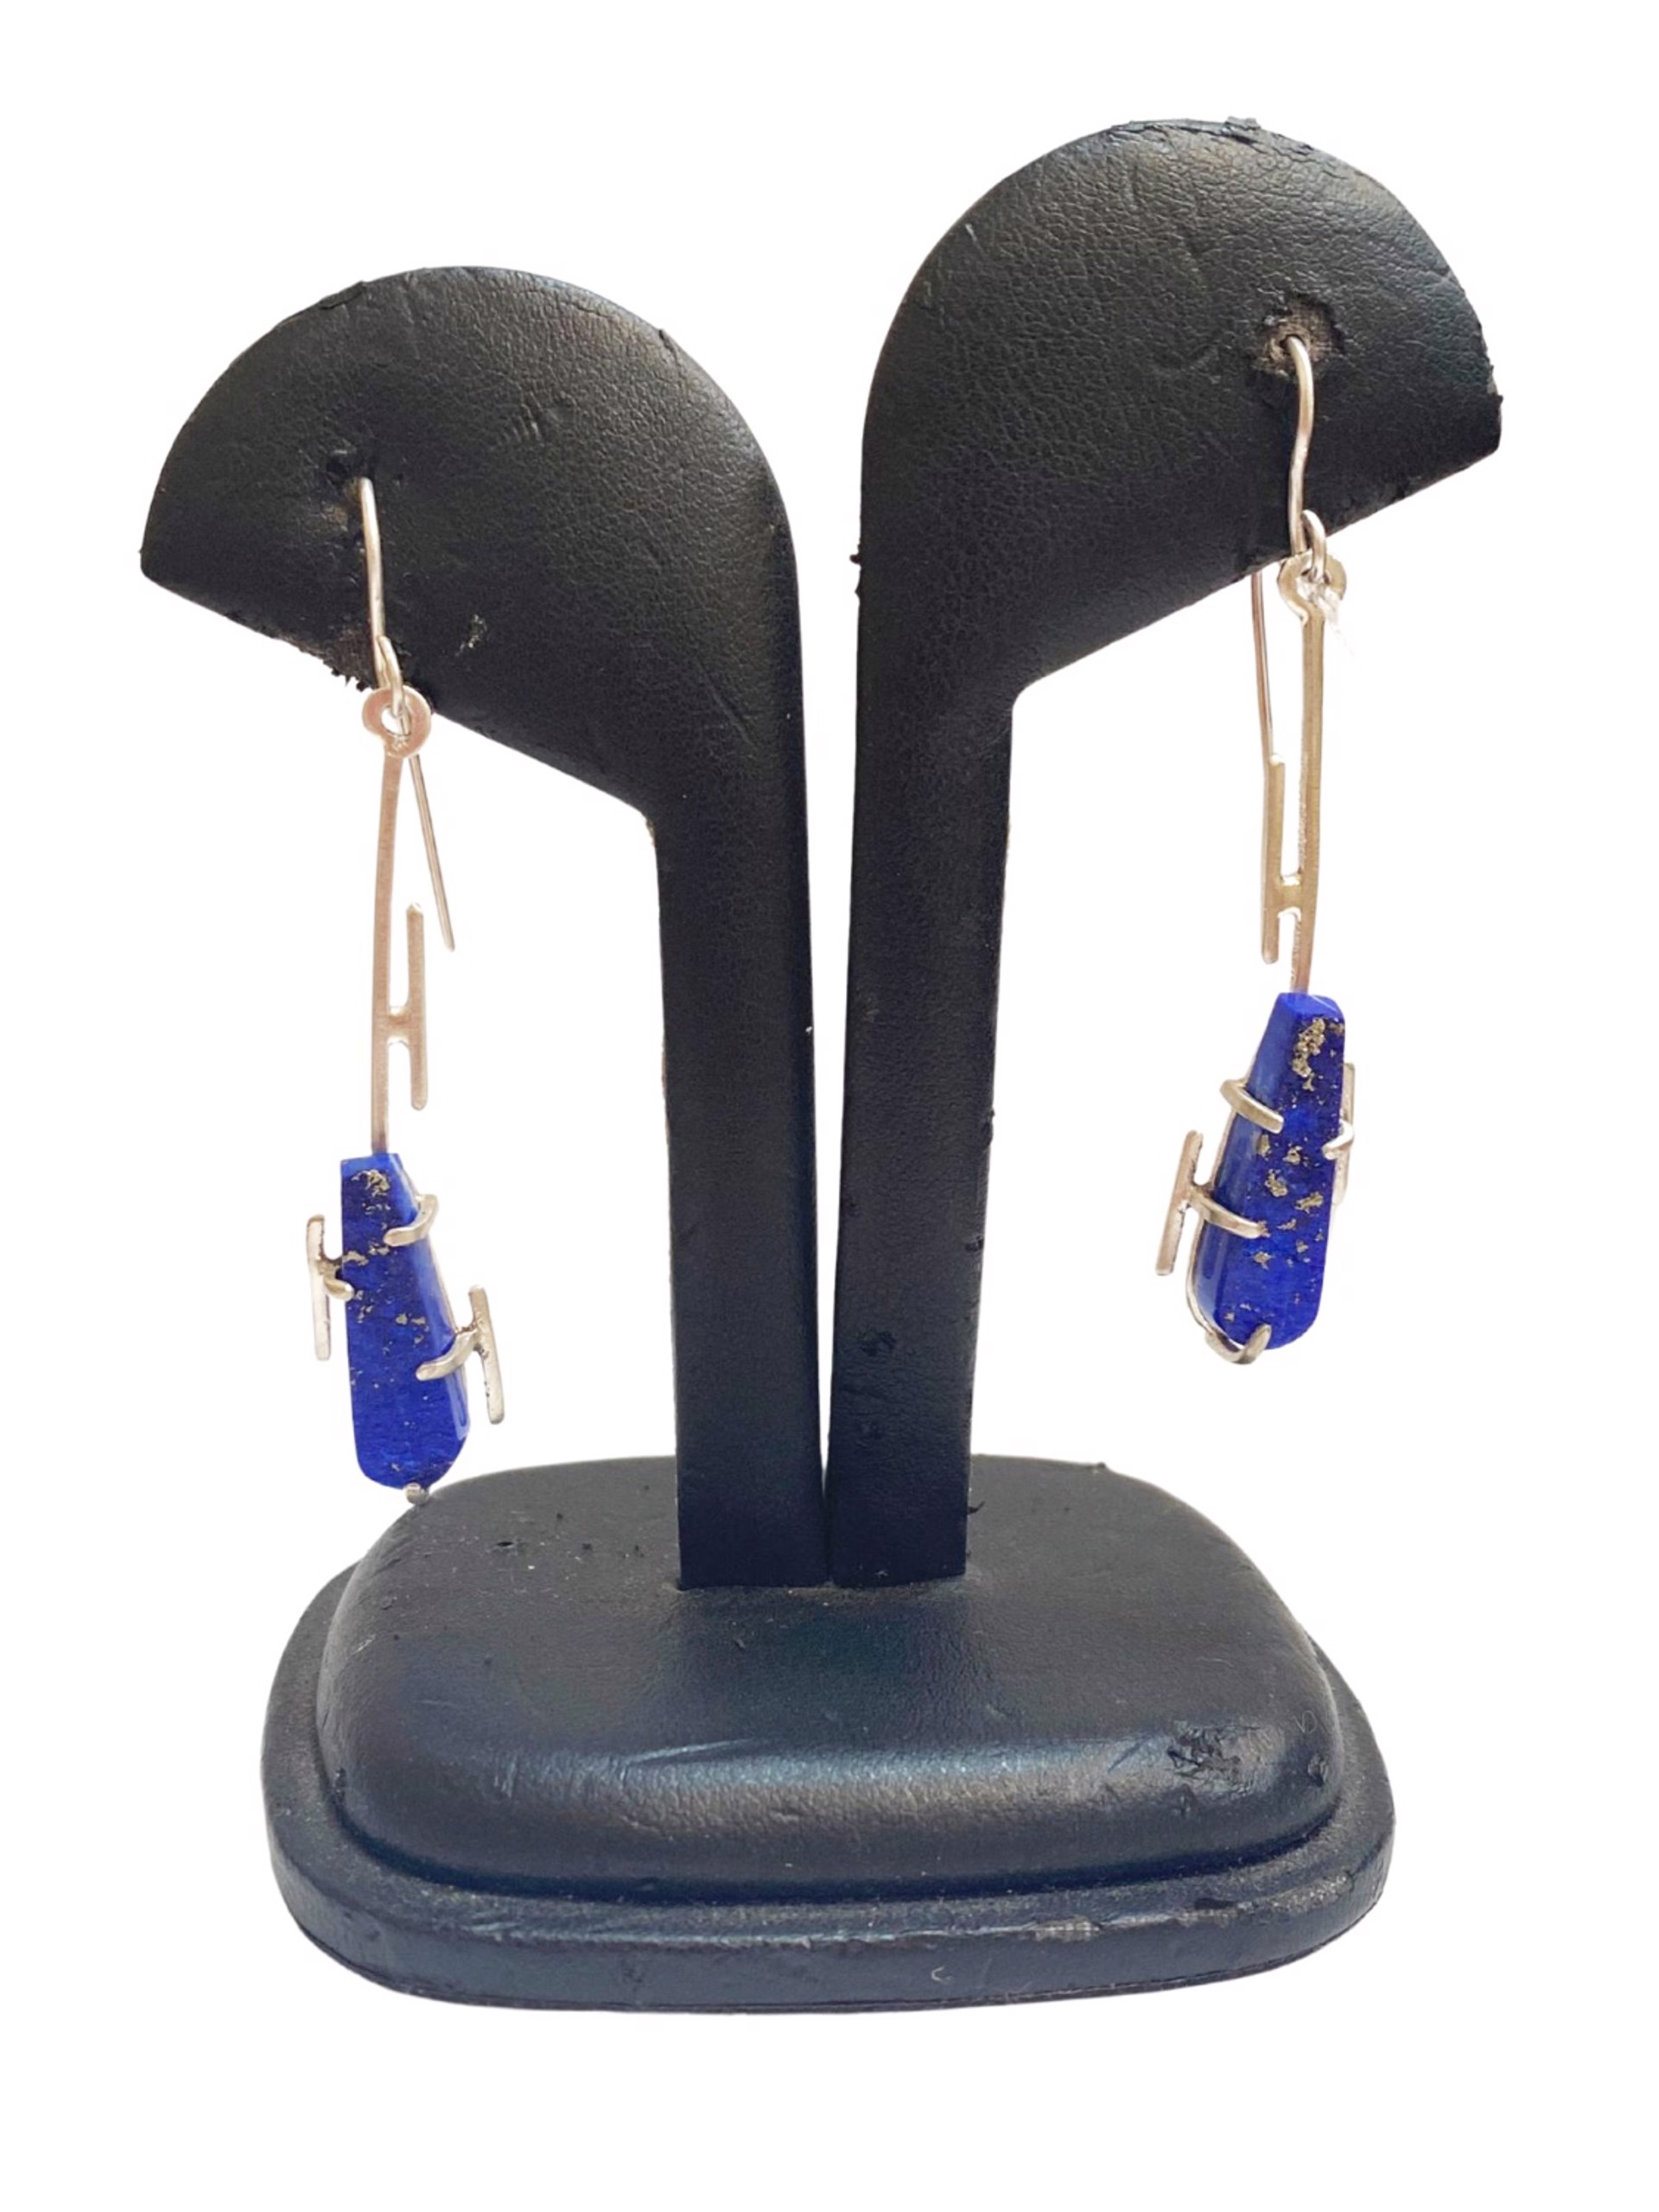 Earrings - Lapis Afgan with Sterling Silver Wires AC 318 by Annette Campbell